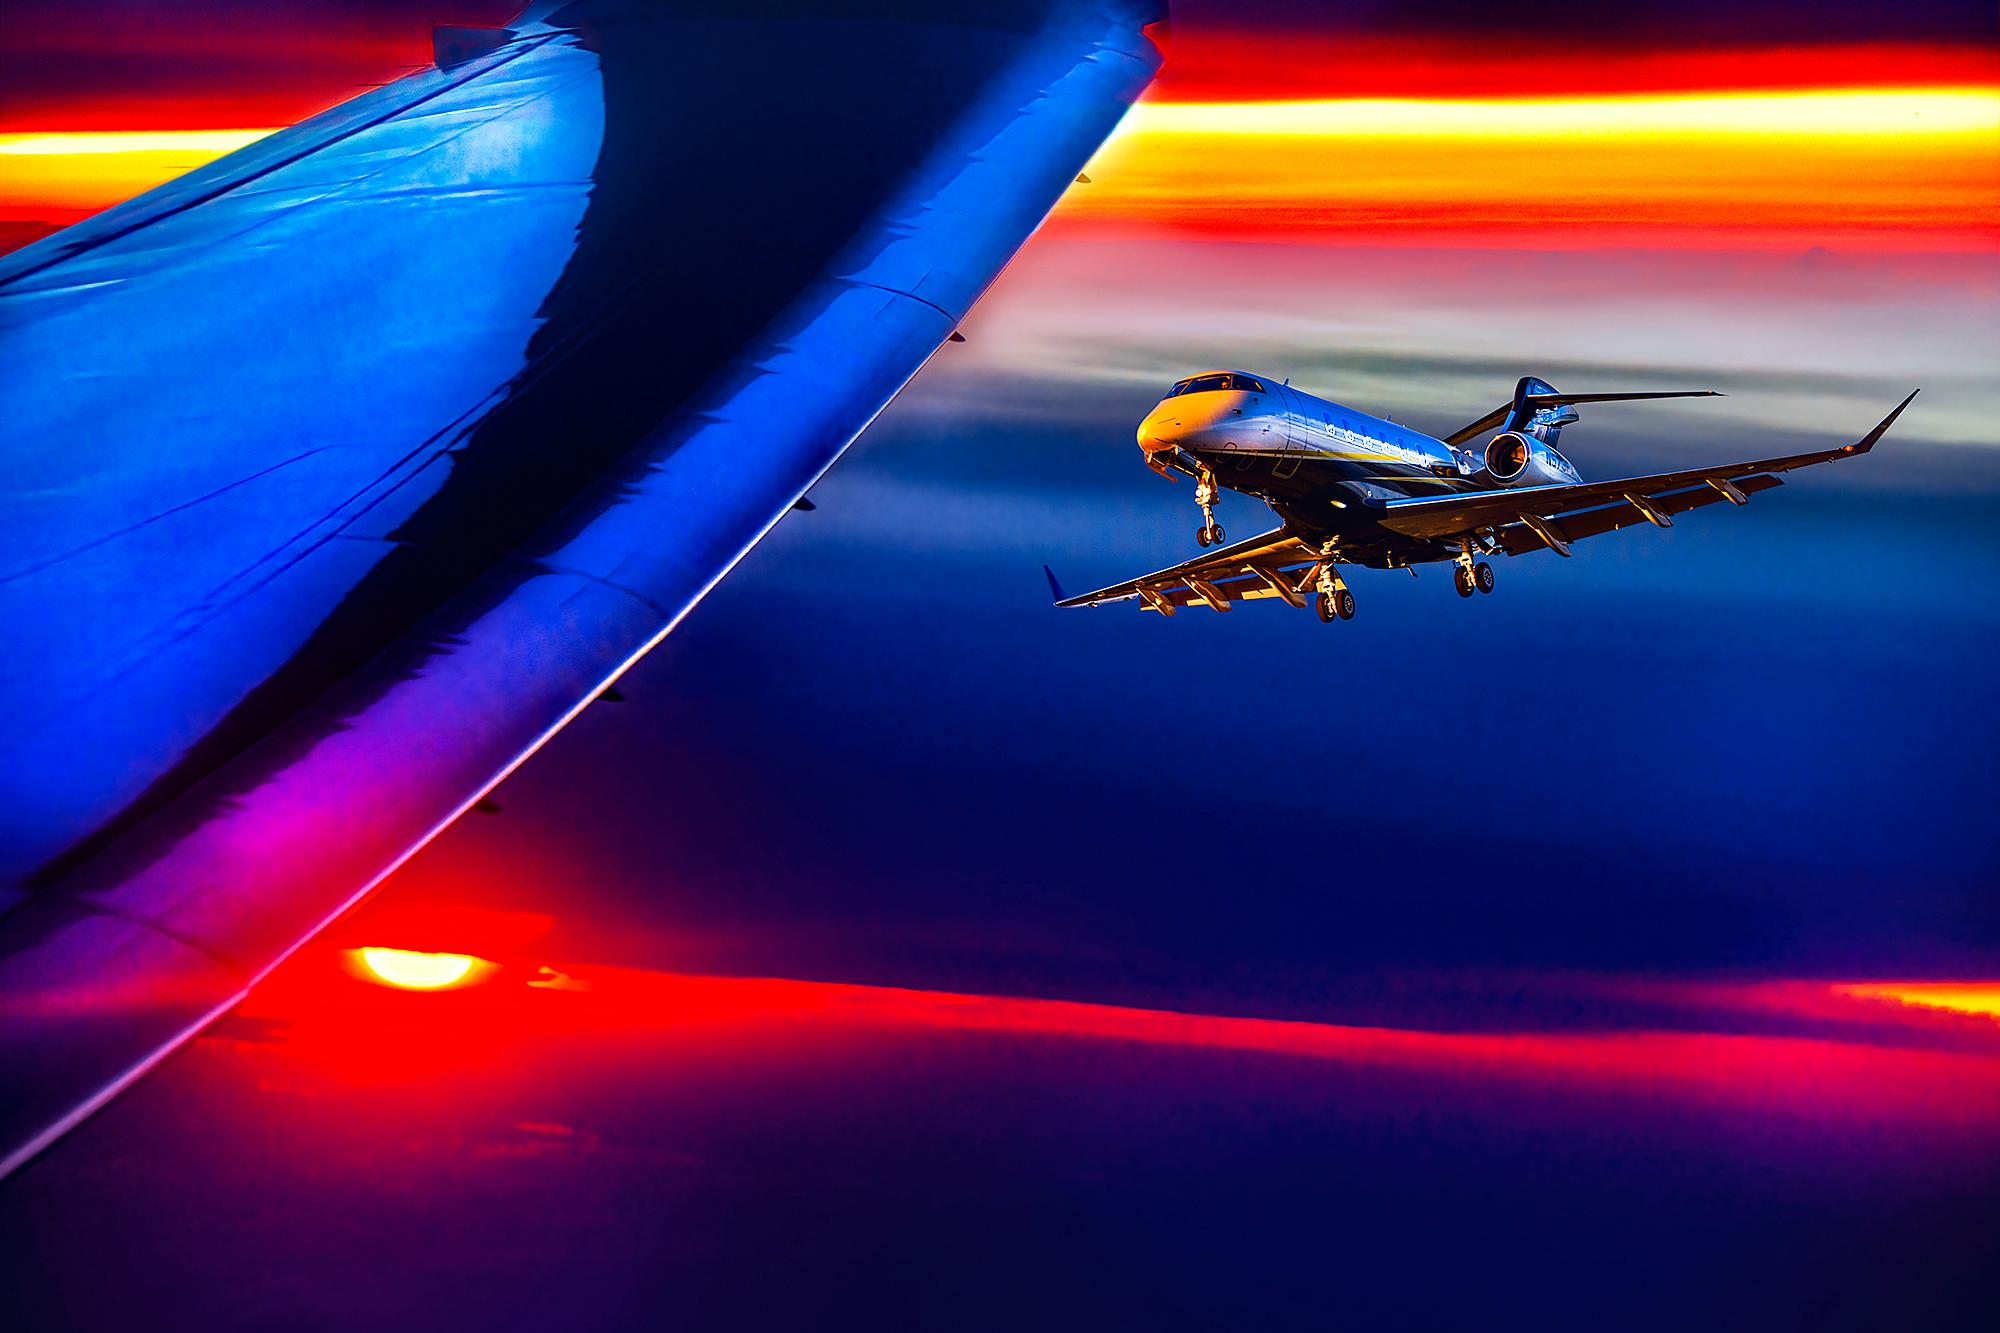 Mitchell Funk Abstract Photograph - Airplane in Surreal Sky